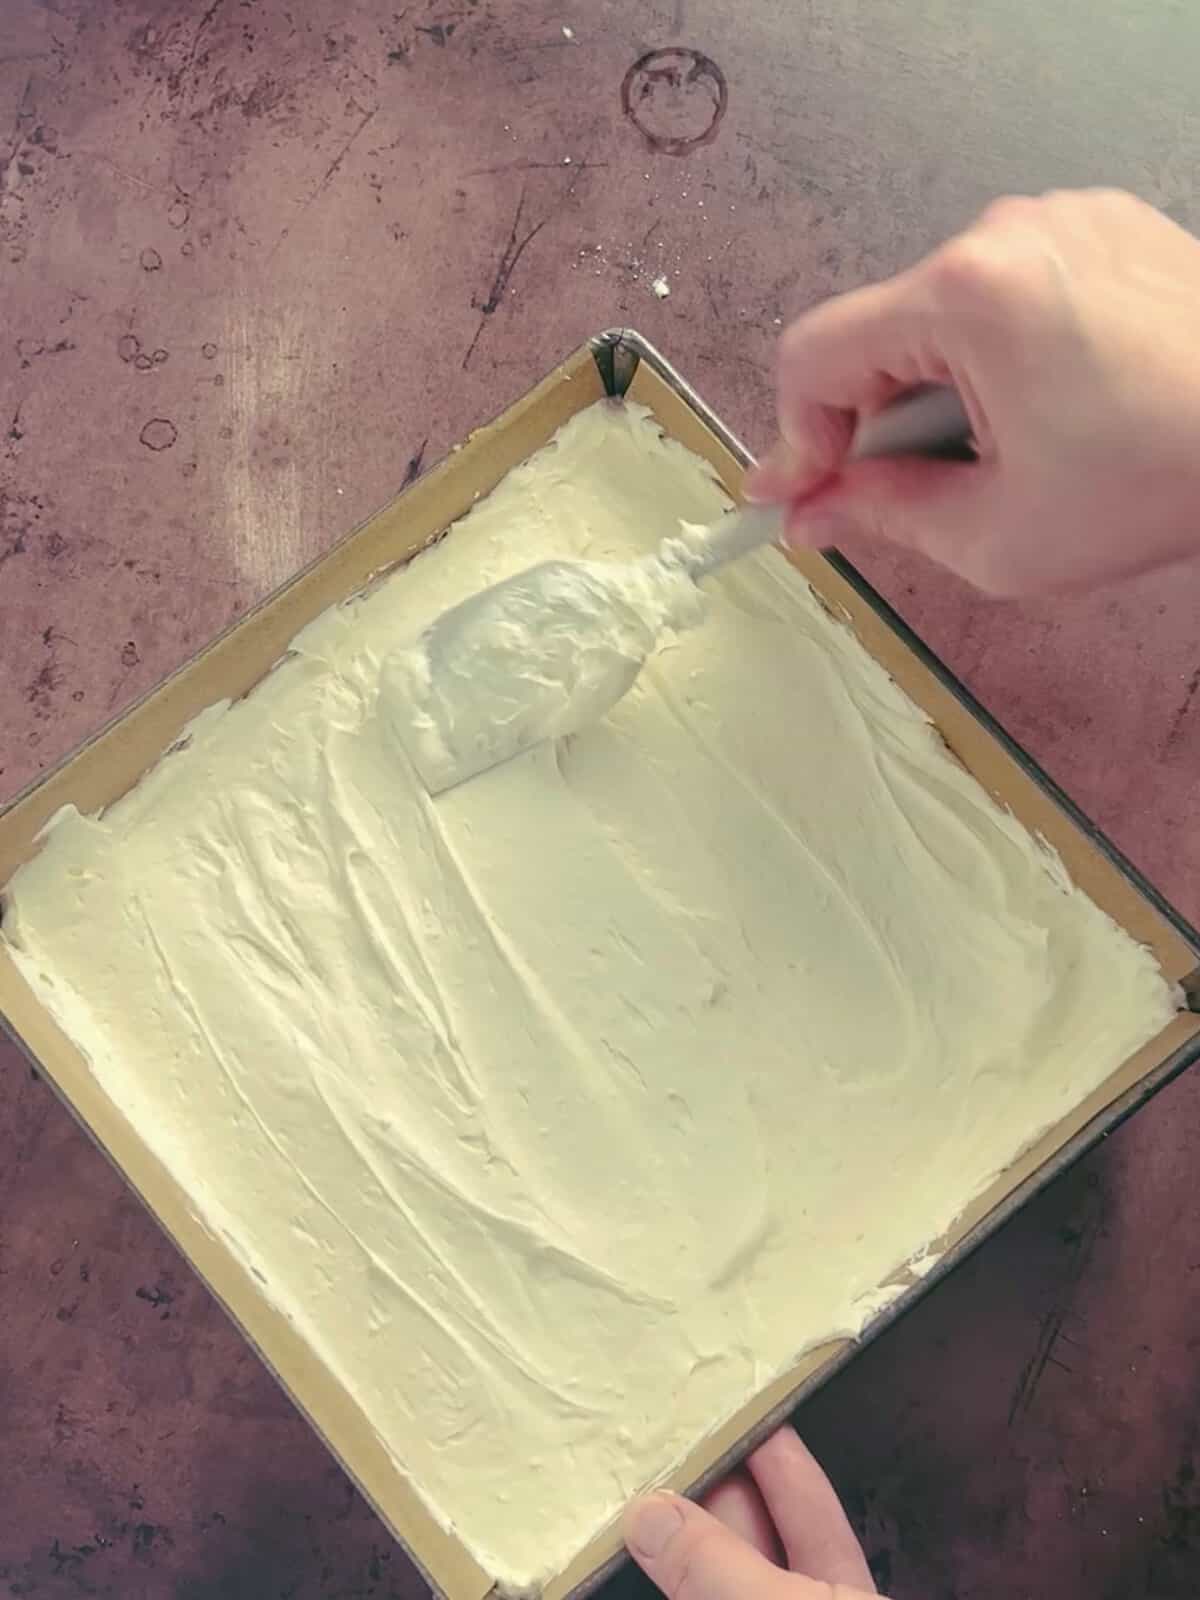 cheesecake filling being spread on top of the cracker crust.